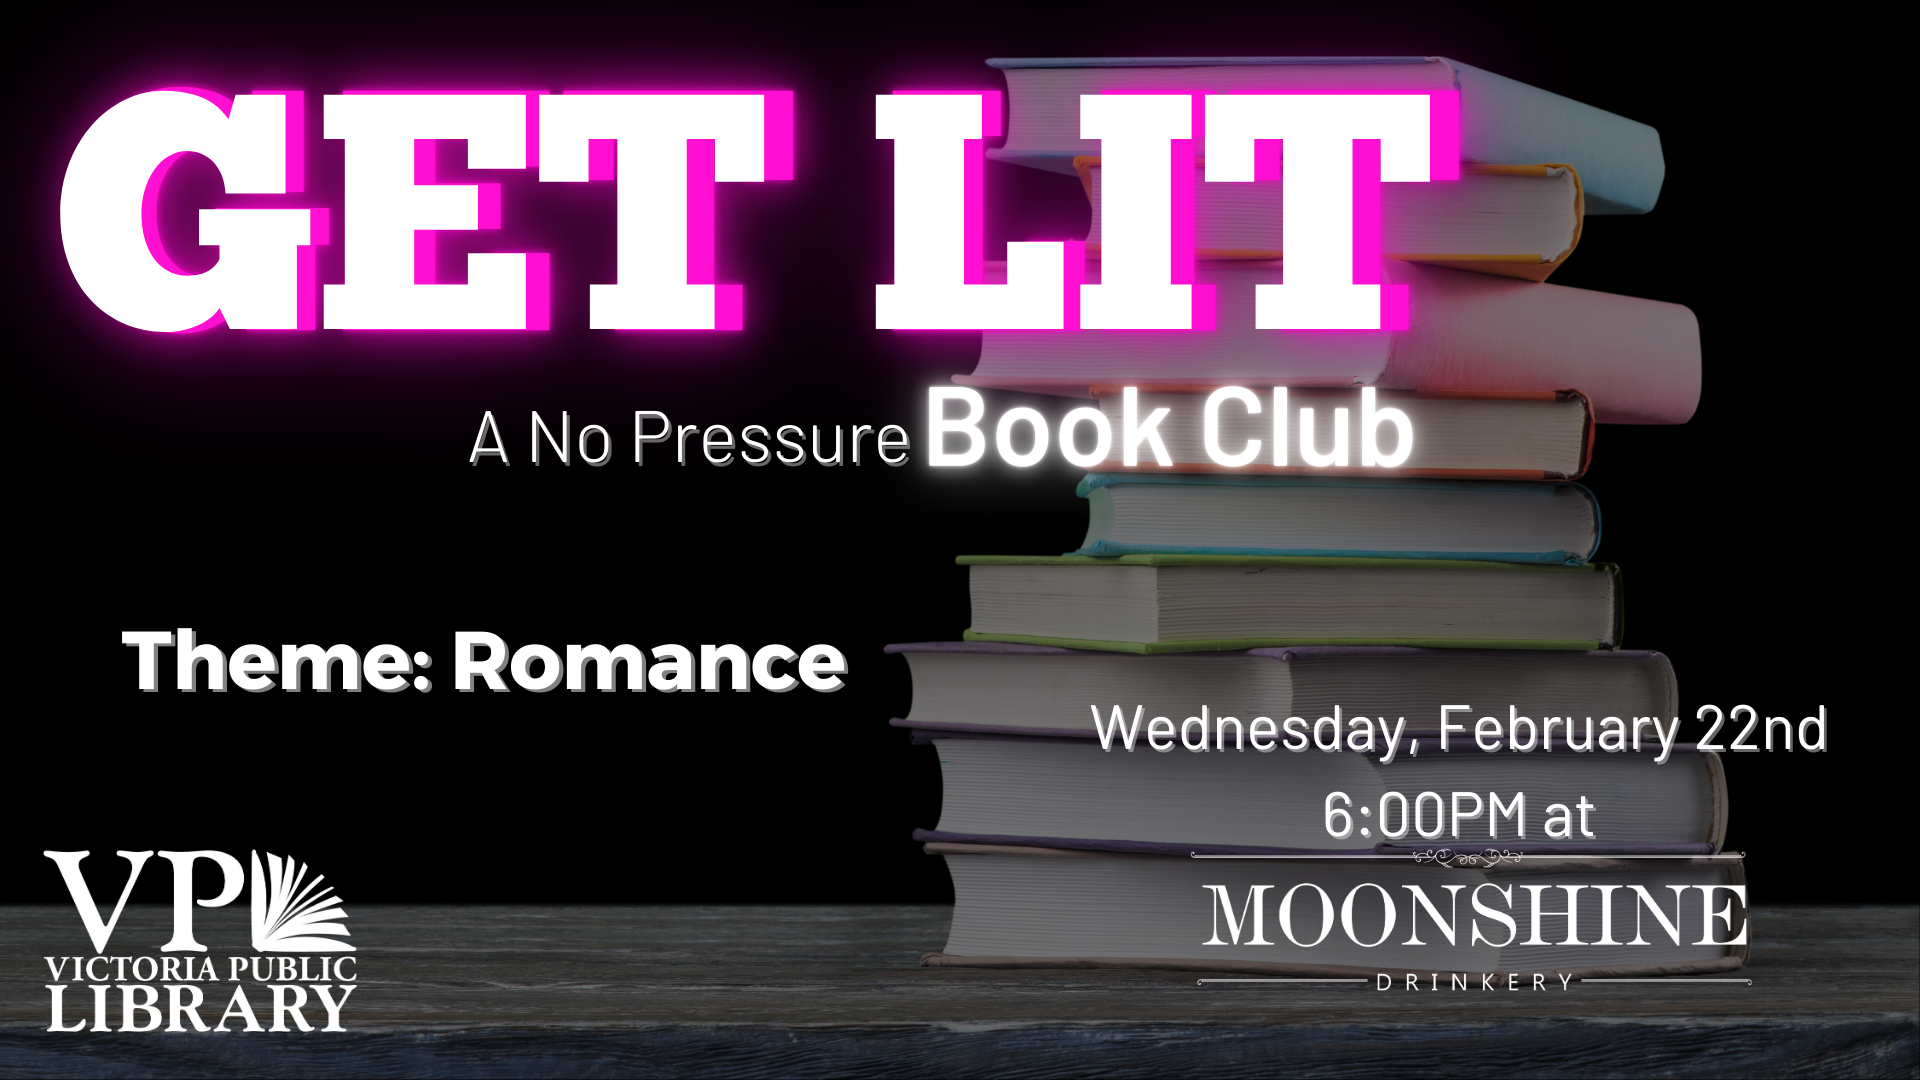 Get Lit, No pressure book club, February 22 at 6pm, Moonshine Drinkery